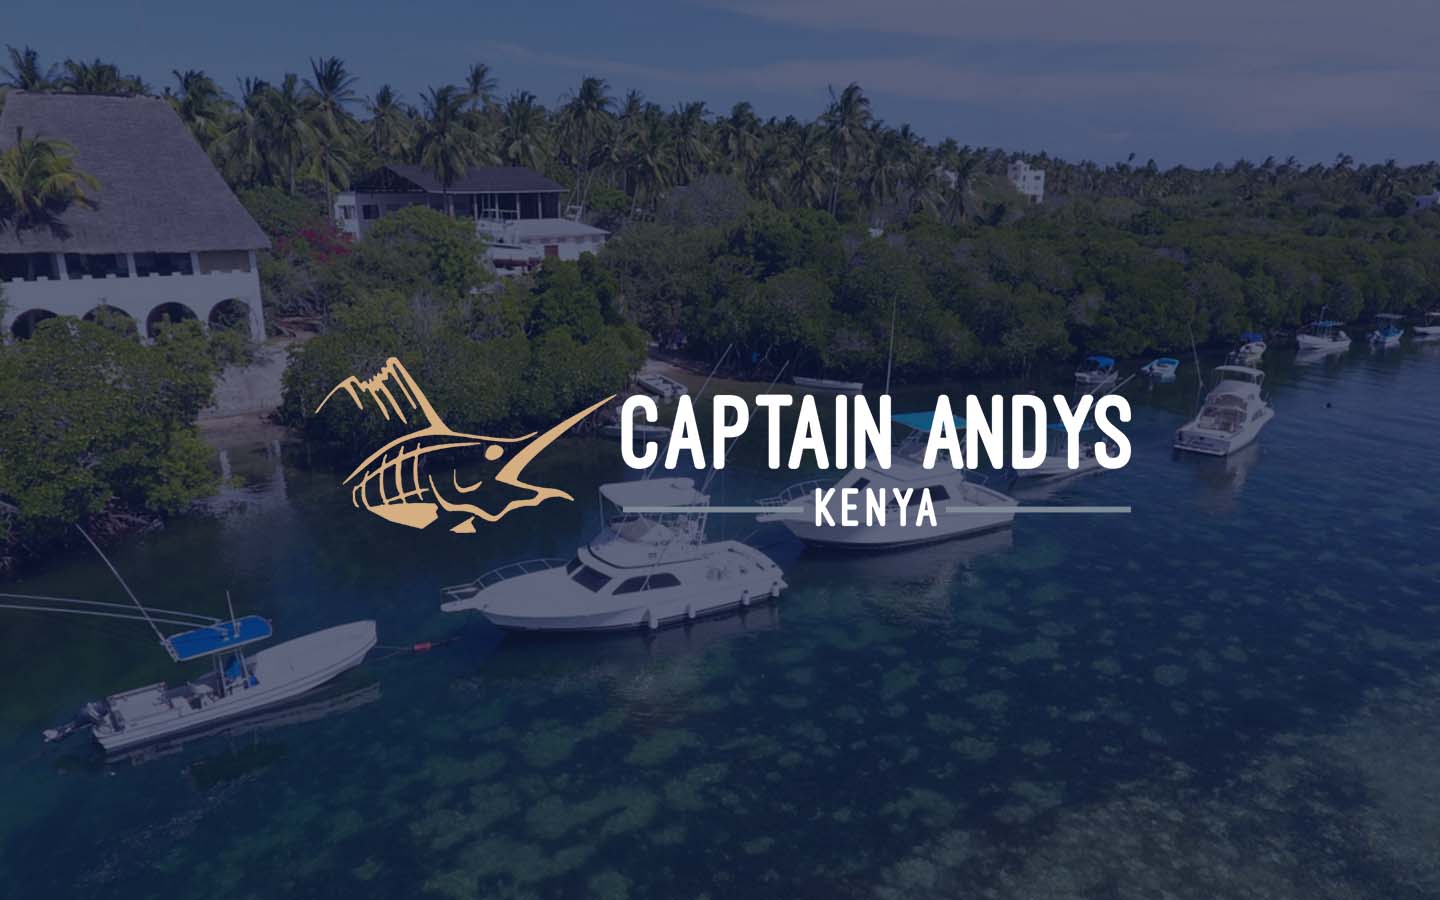 South wind blows to signal end of season approaching. - Captains Andys Kenya - captain andys kenya 6